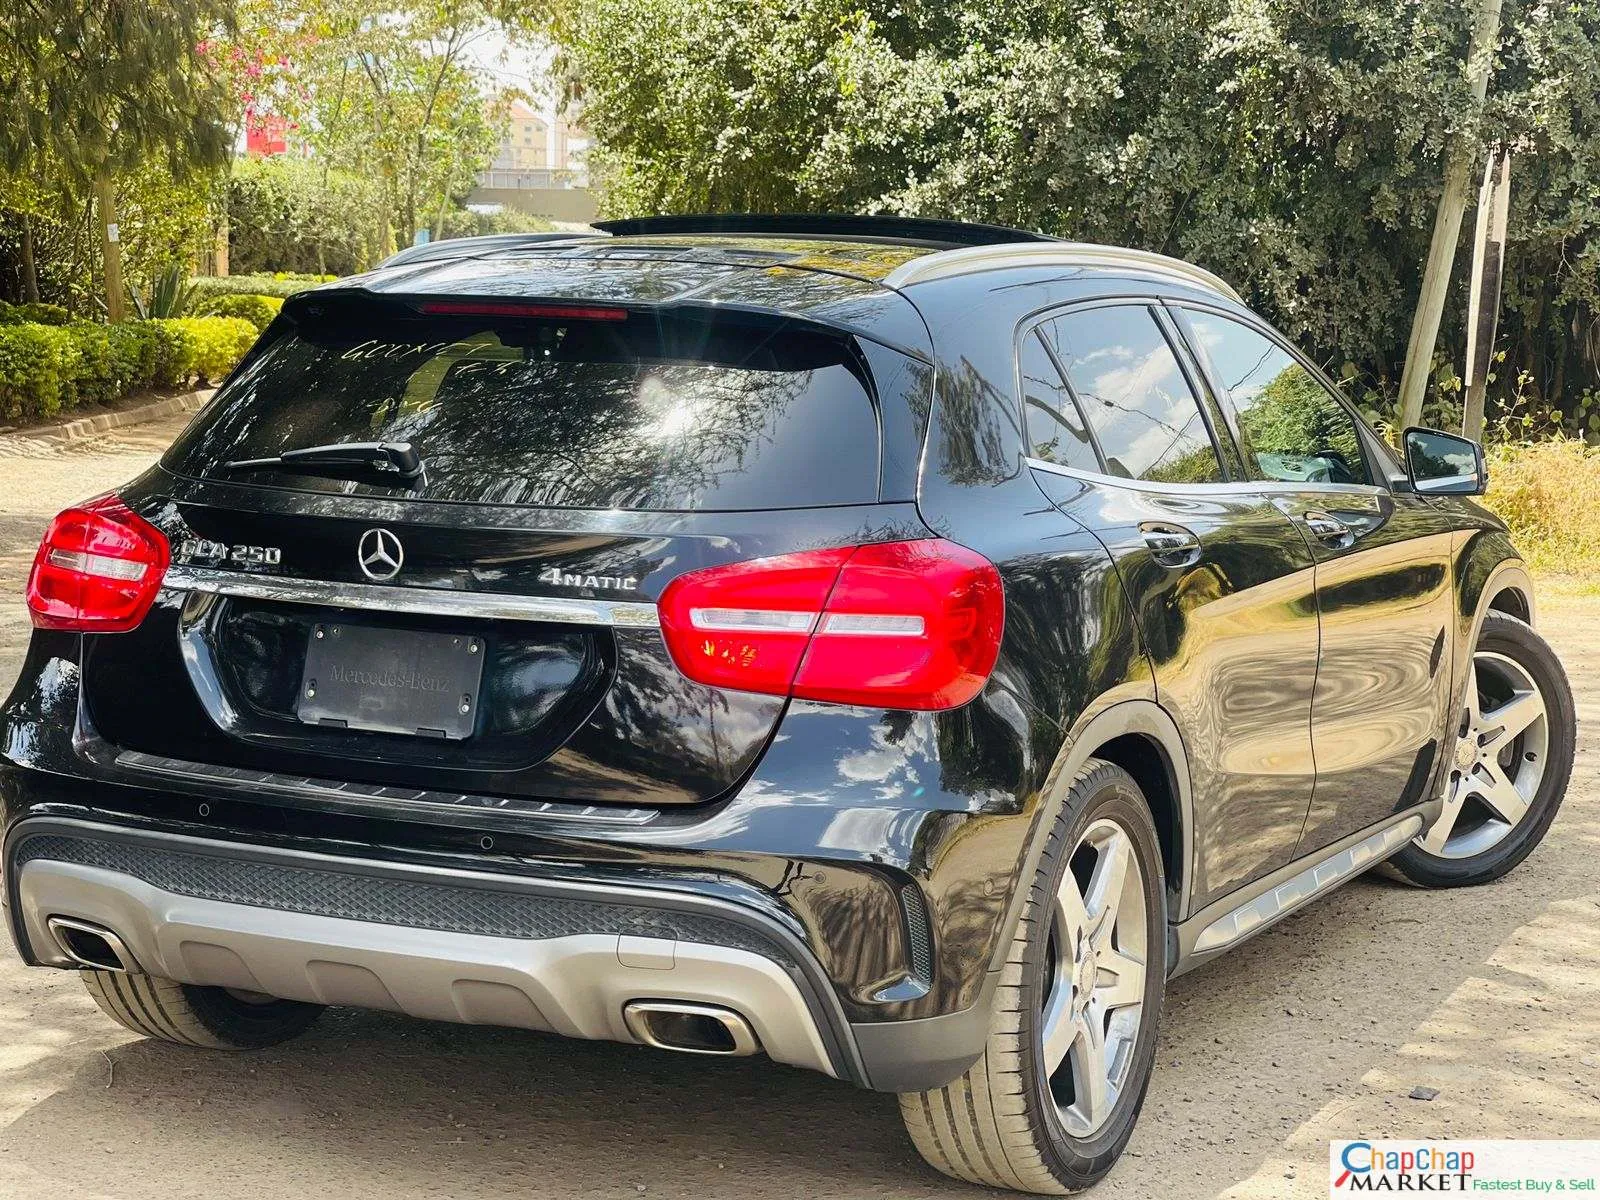 Mercedes Benz GLA 250 4matic 🔥 You Pay 30% DEPOSIT Mercedes GLA for sale in kenya hire purchase installments GLA Trade in OK EXCLUSIVE